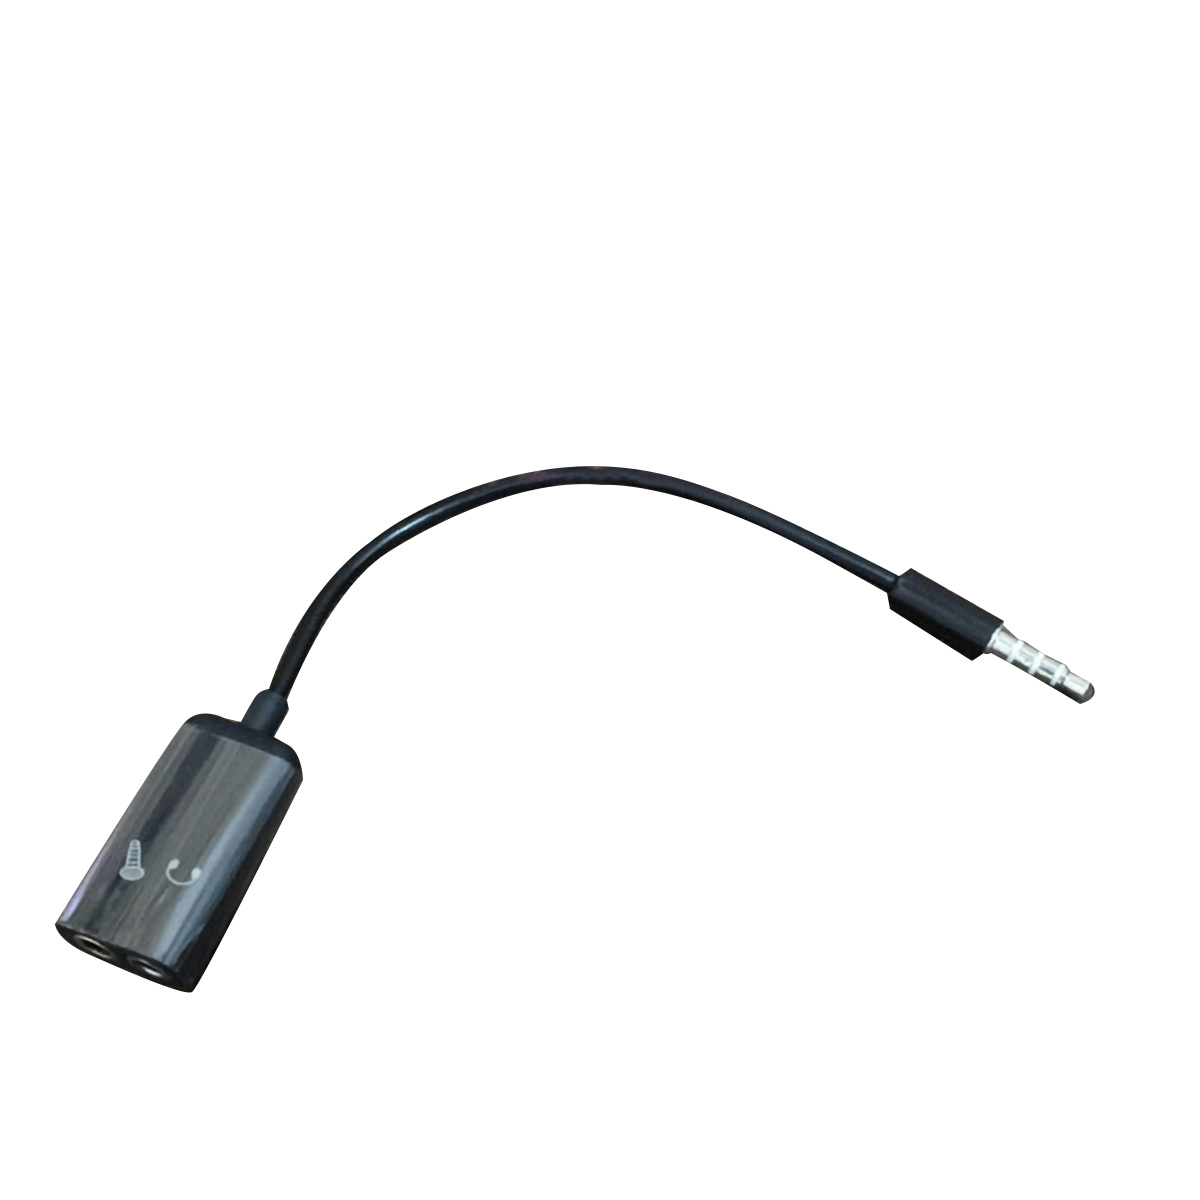 15cm-35mm-Portable-Audio-Line-Aux-Adapter-Data-Cable-Extension-Cord-for-Microphone-Mobile-Phone-1635118